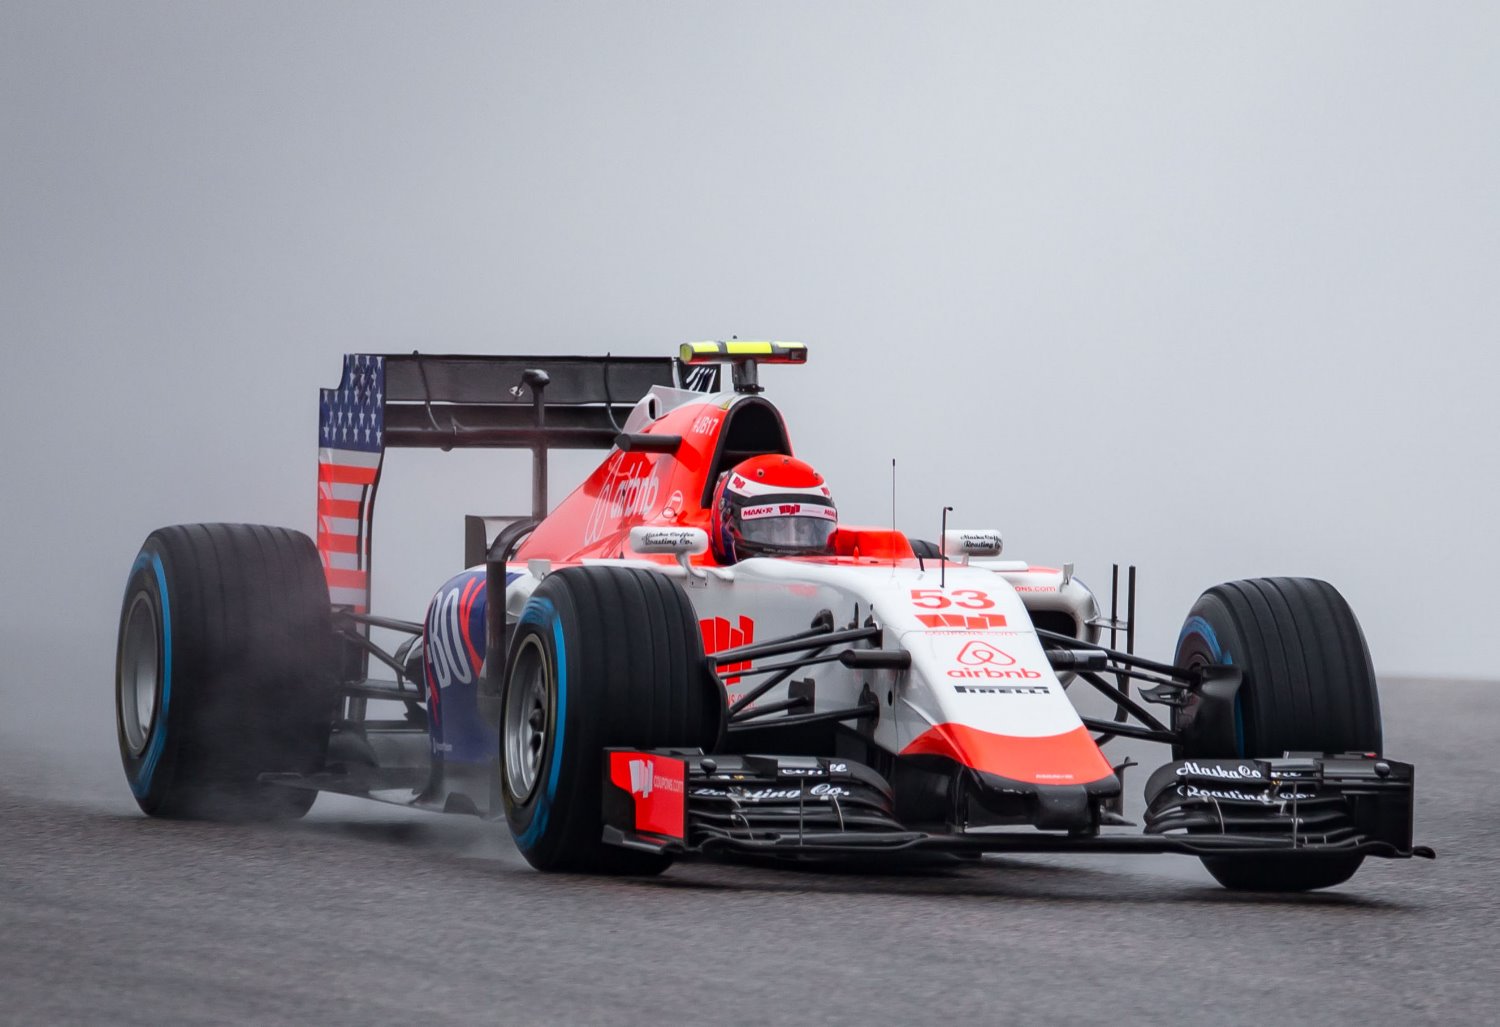 Will Alexander Rossi go back to F1 with Manor to run at the back?